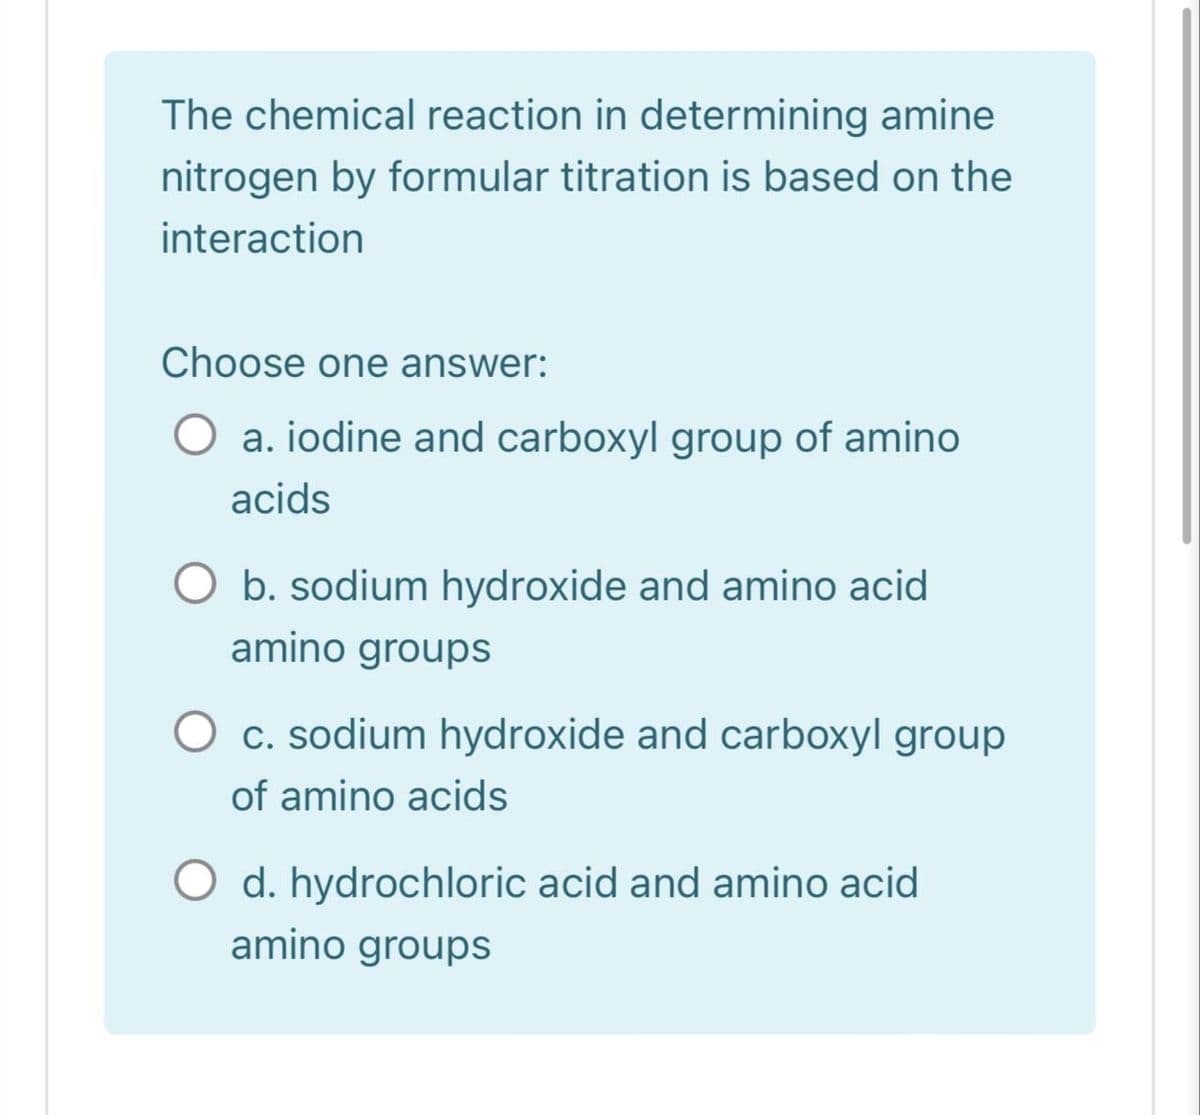 The chemical reaction in determining amine
nitrogen by formular titration is based on the
interaction
Choose one answer:
a. iodine and carboxyl group of amino
acids
b. sodium hydroxide and amino acid
amino groups
C. sodium hydroxide and carboxyl group
of amino acids
O d. hydrochloric acid and amino acid
amino groups
